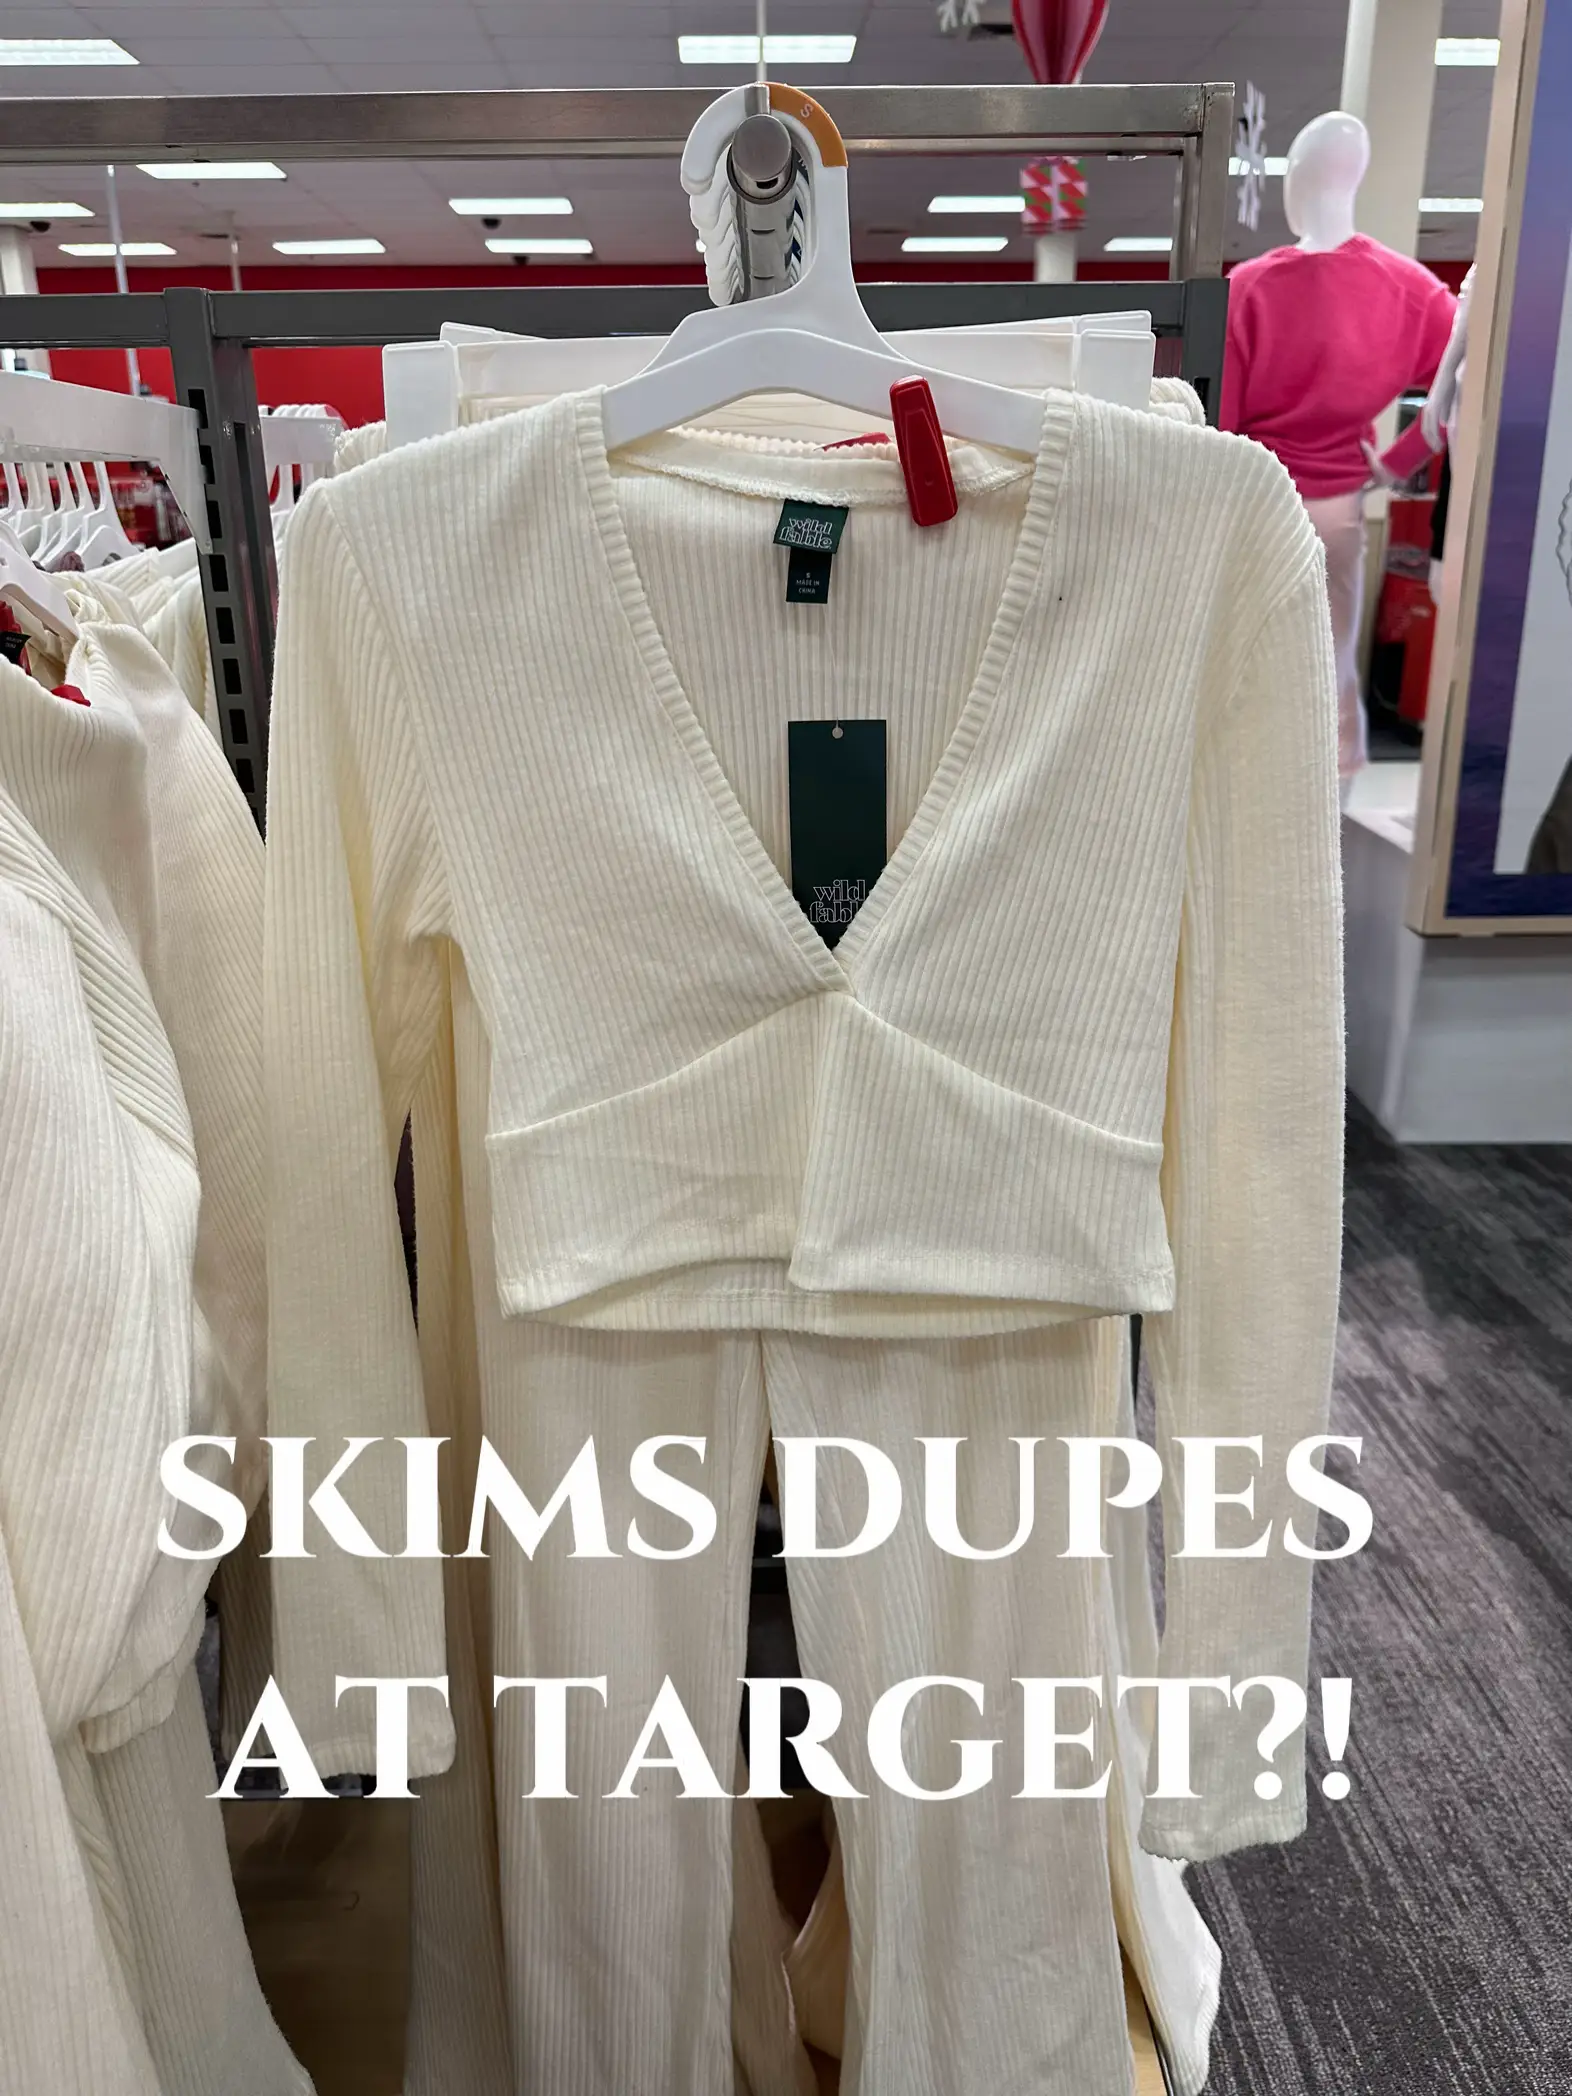 New Skims dupes at Target 🤝 In a new color! These are also amazing ba, SKIMS